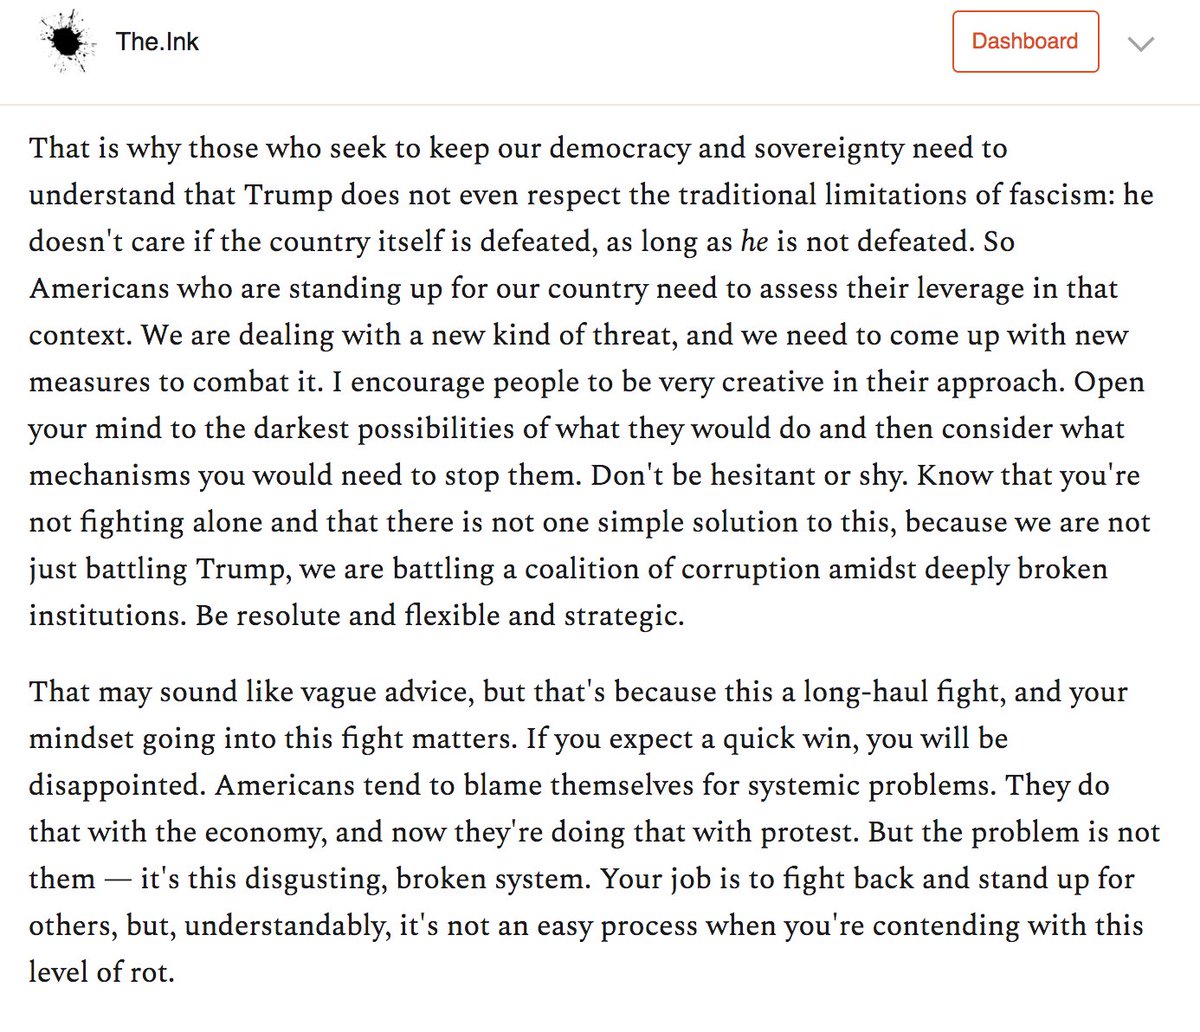 "We are dealing with a new kind of threat, and we need to come up with new measures to combat it." @sarahkendzior's advice to those who would save America from tyranny. https://the.ink/p/sarah-kendzior